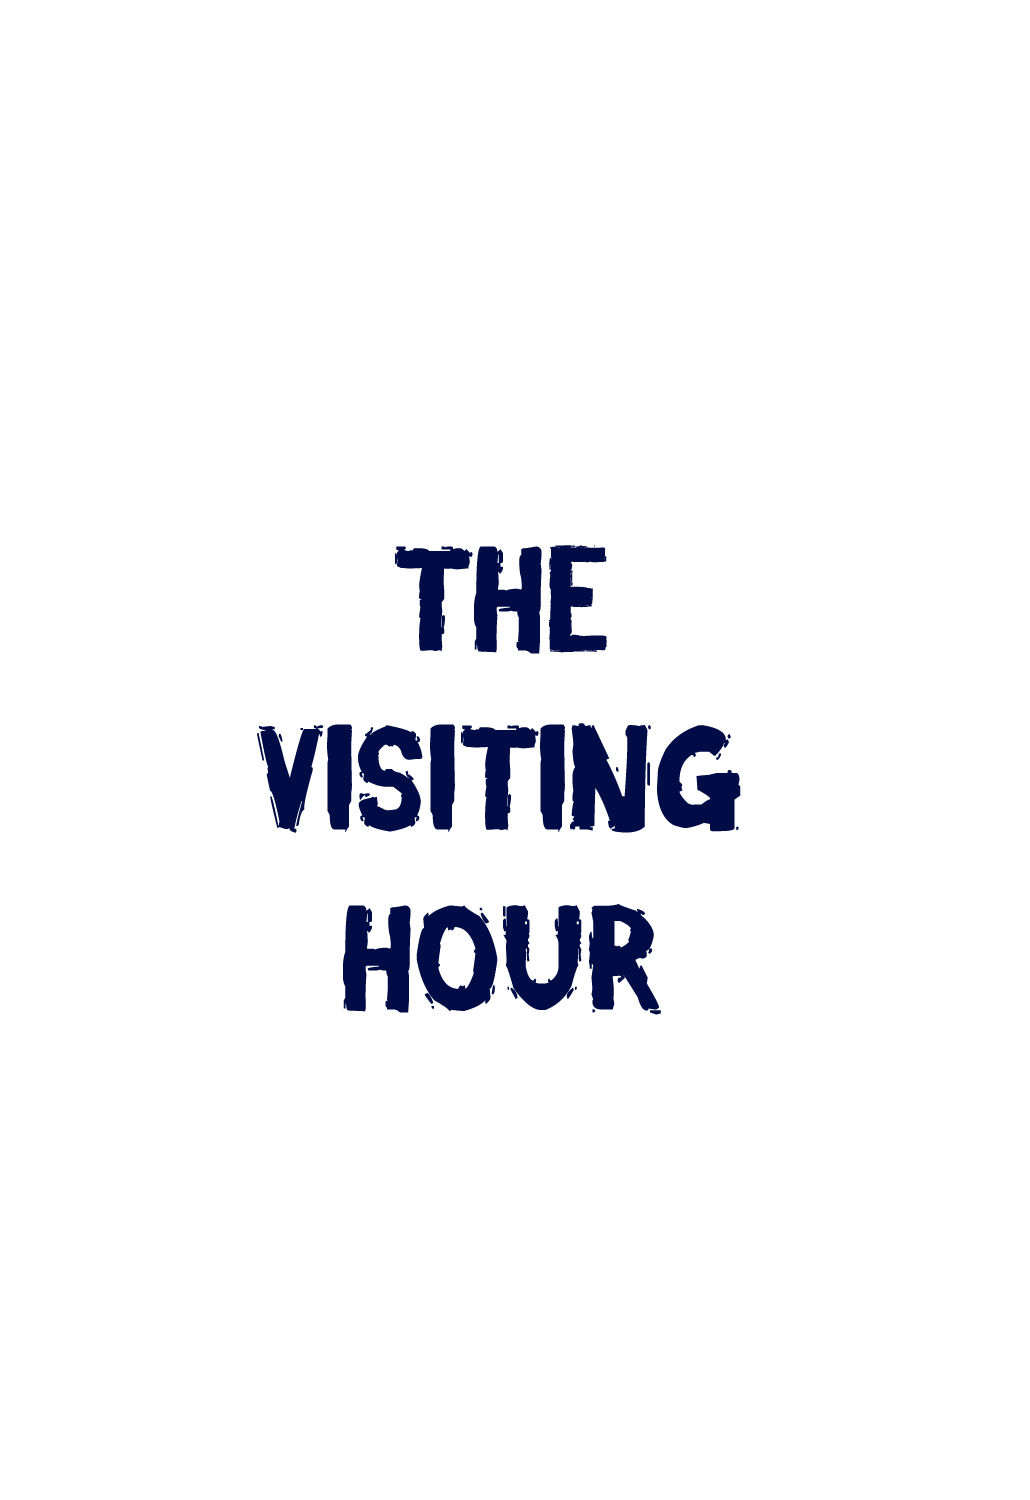 THE VISITING HOUR